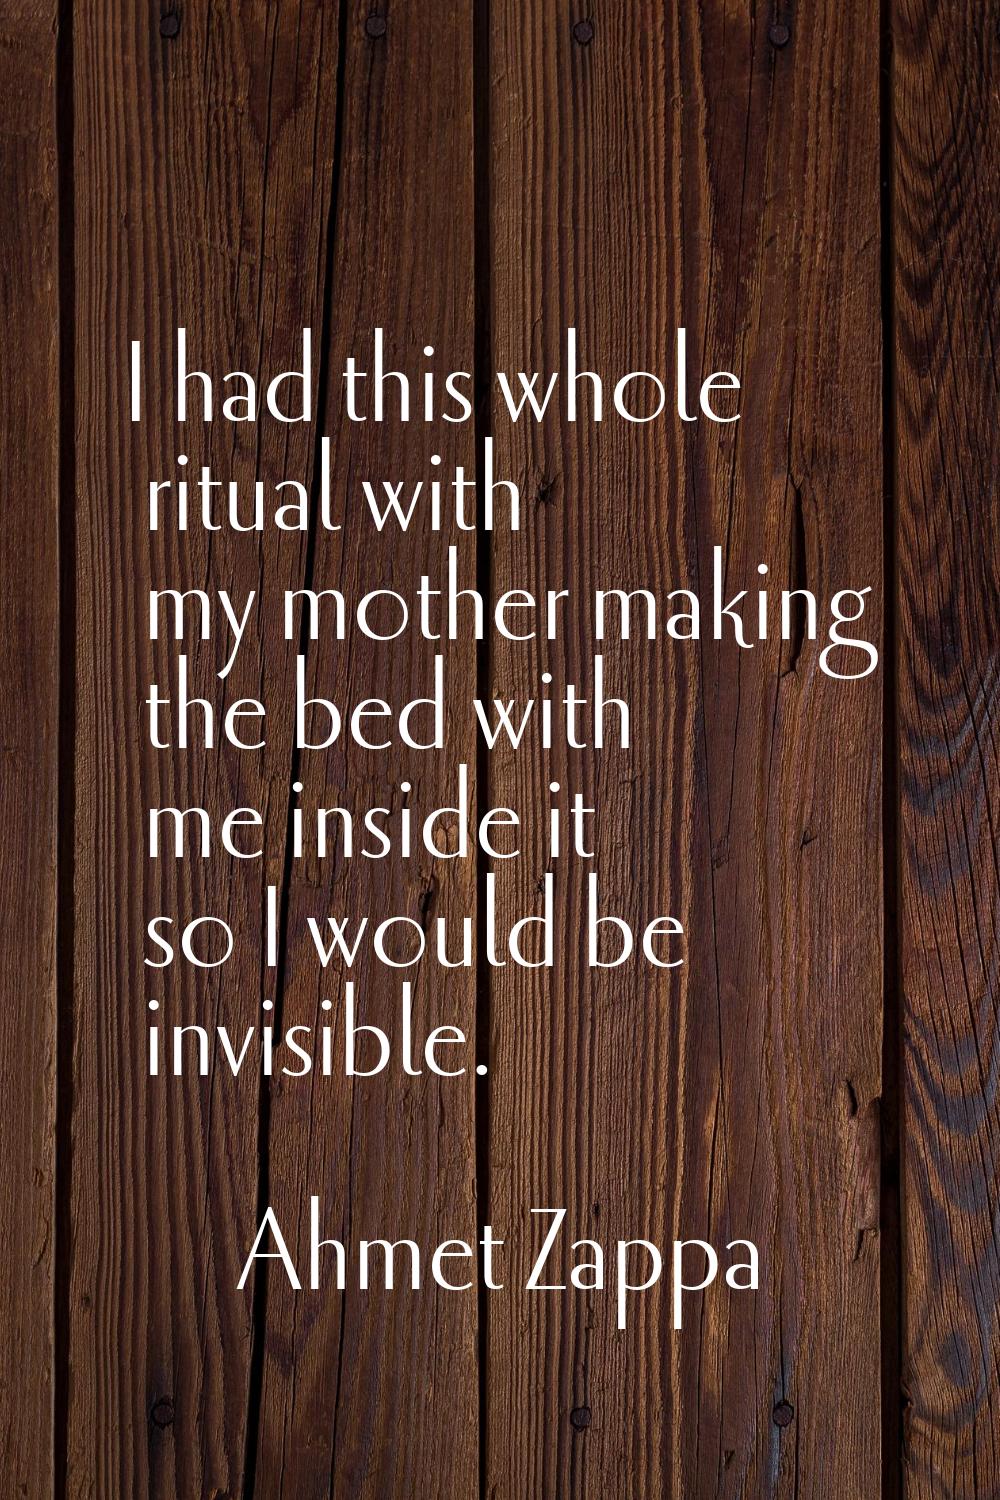 I had this whole ritual with my mother making the bed with me inside it so I would be invisible.